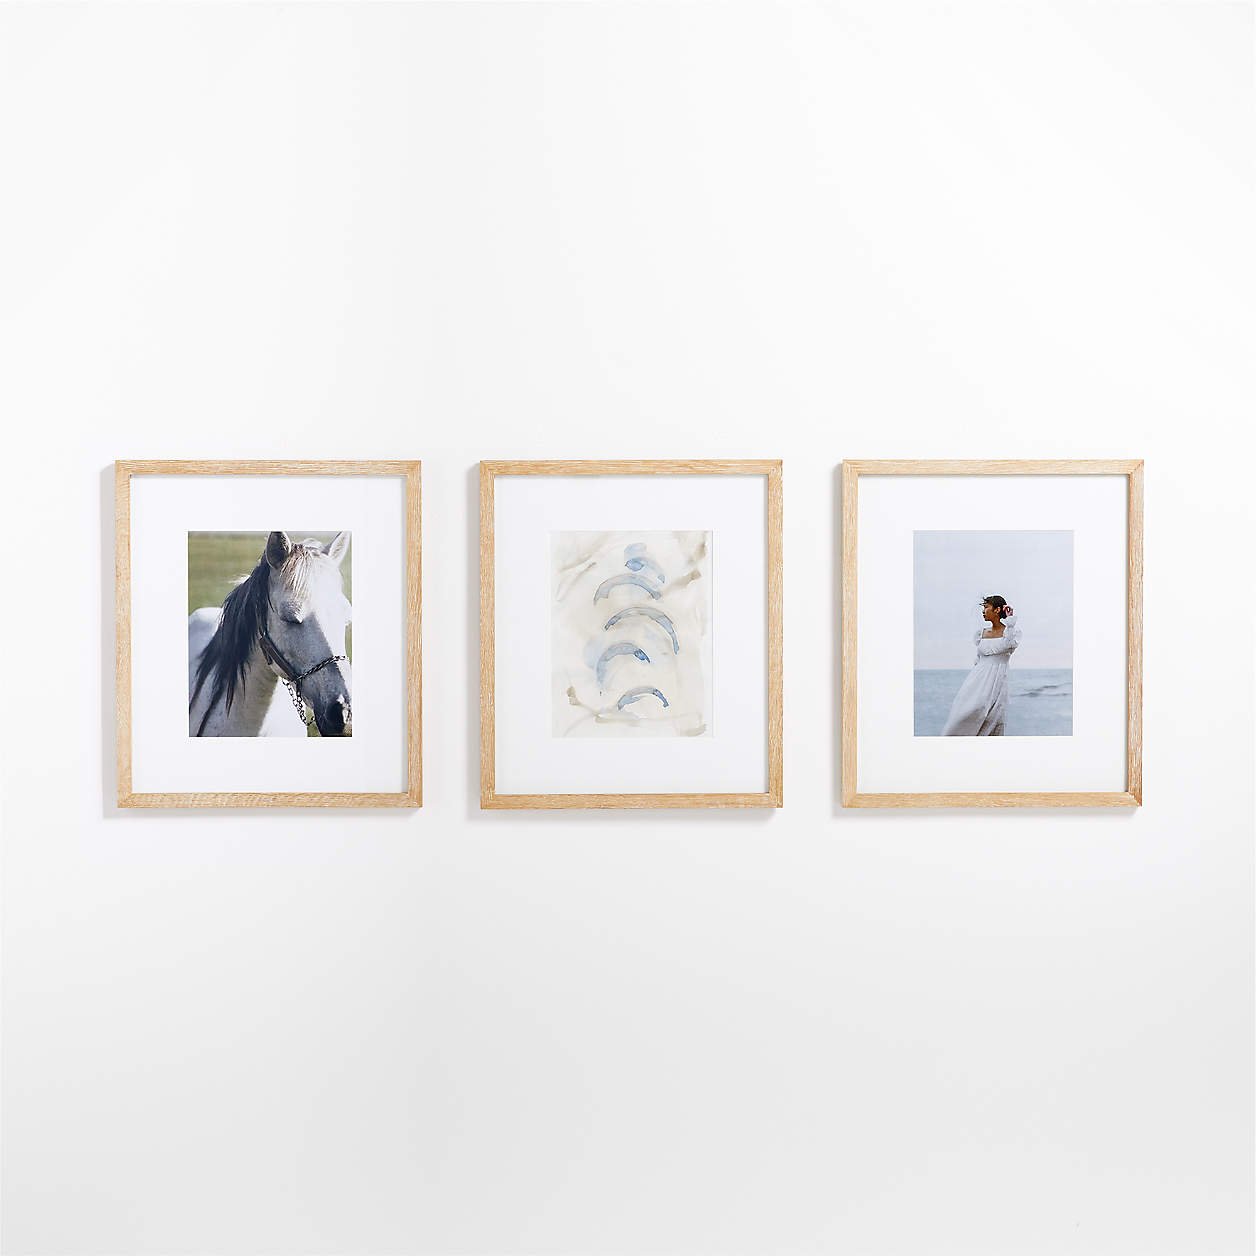 3-Piece Light Oak Wood 11x14 Gallery Wall Picture Frame Set | Crate ...